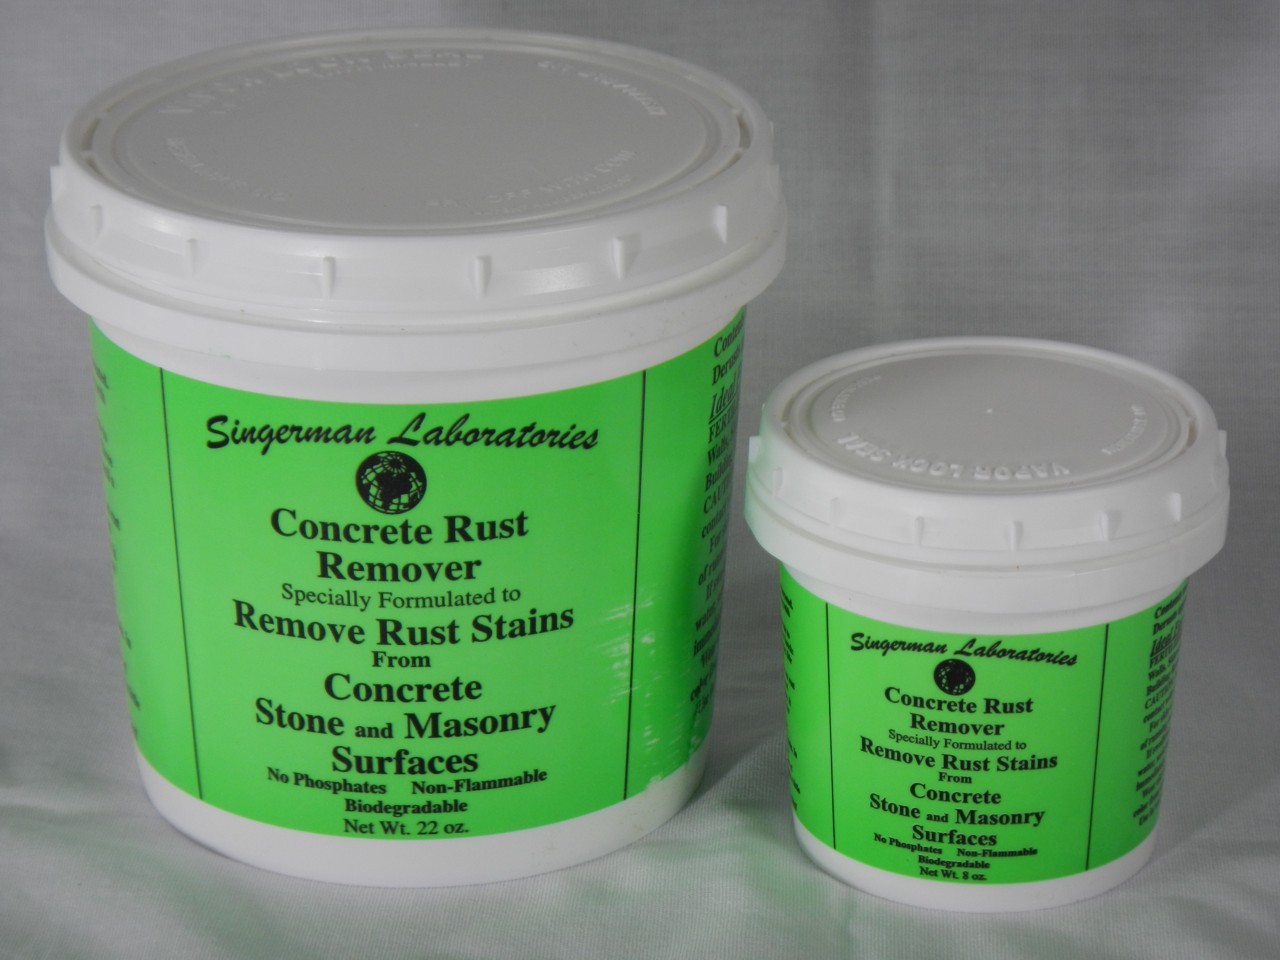 Once seal green rust remover is mixed how long can it sit before you can no longer use /apply the solution?